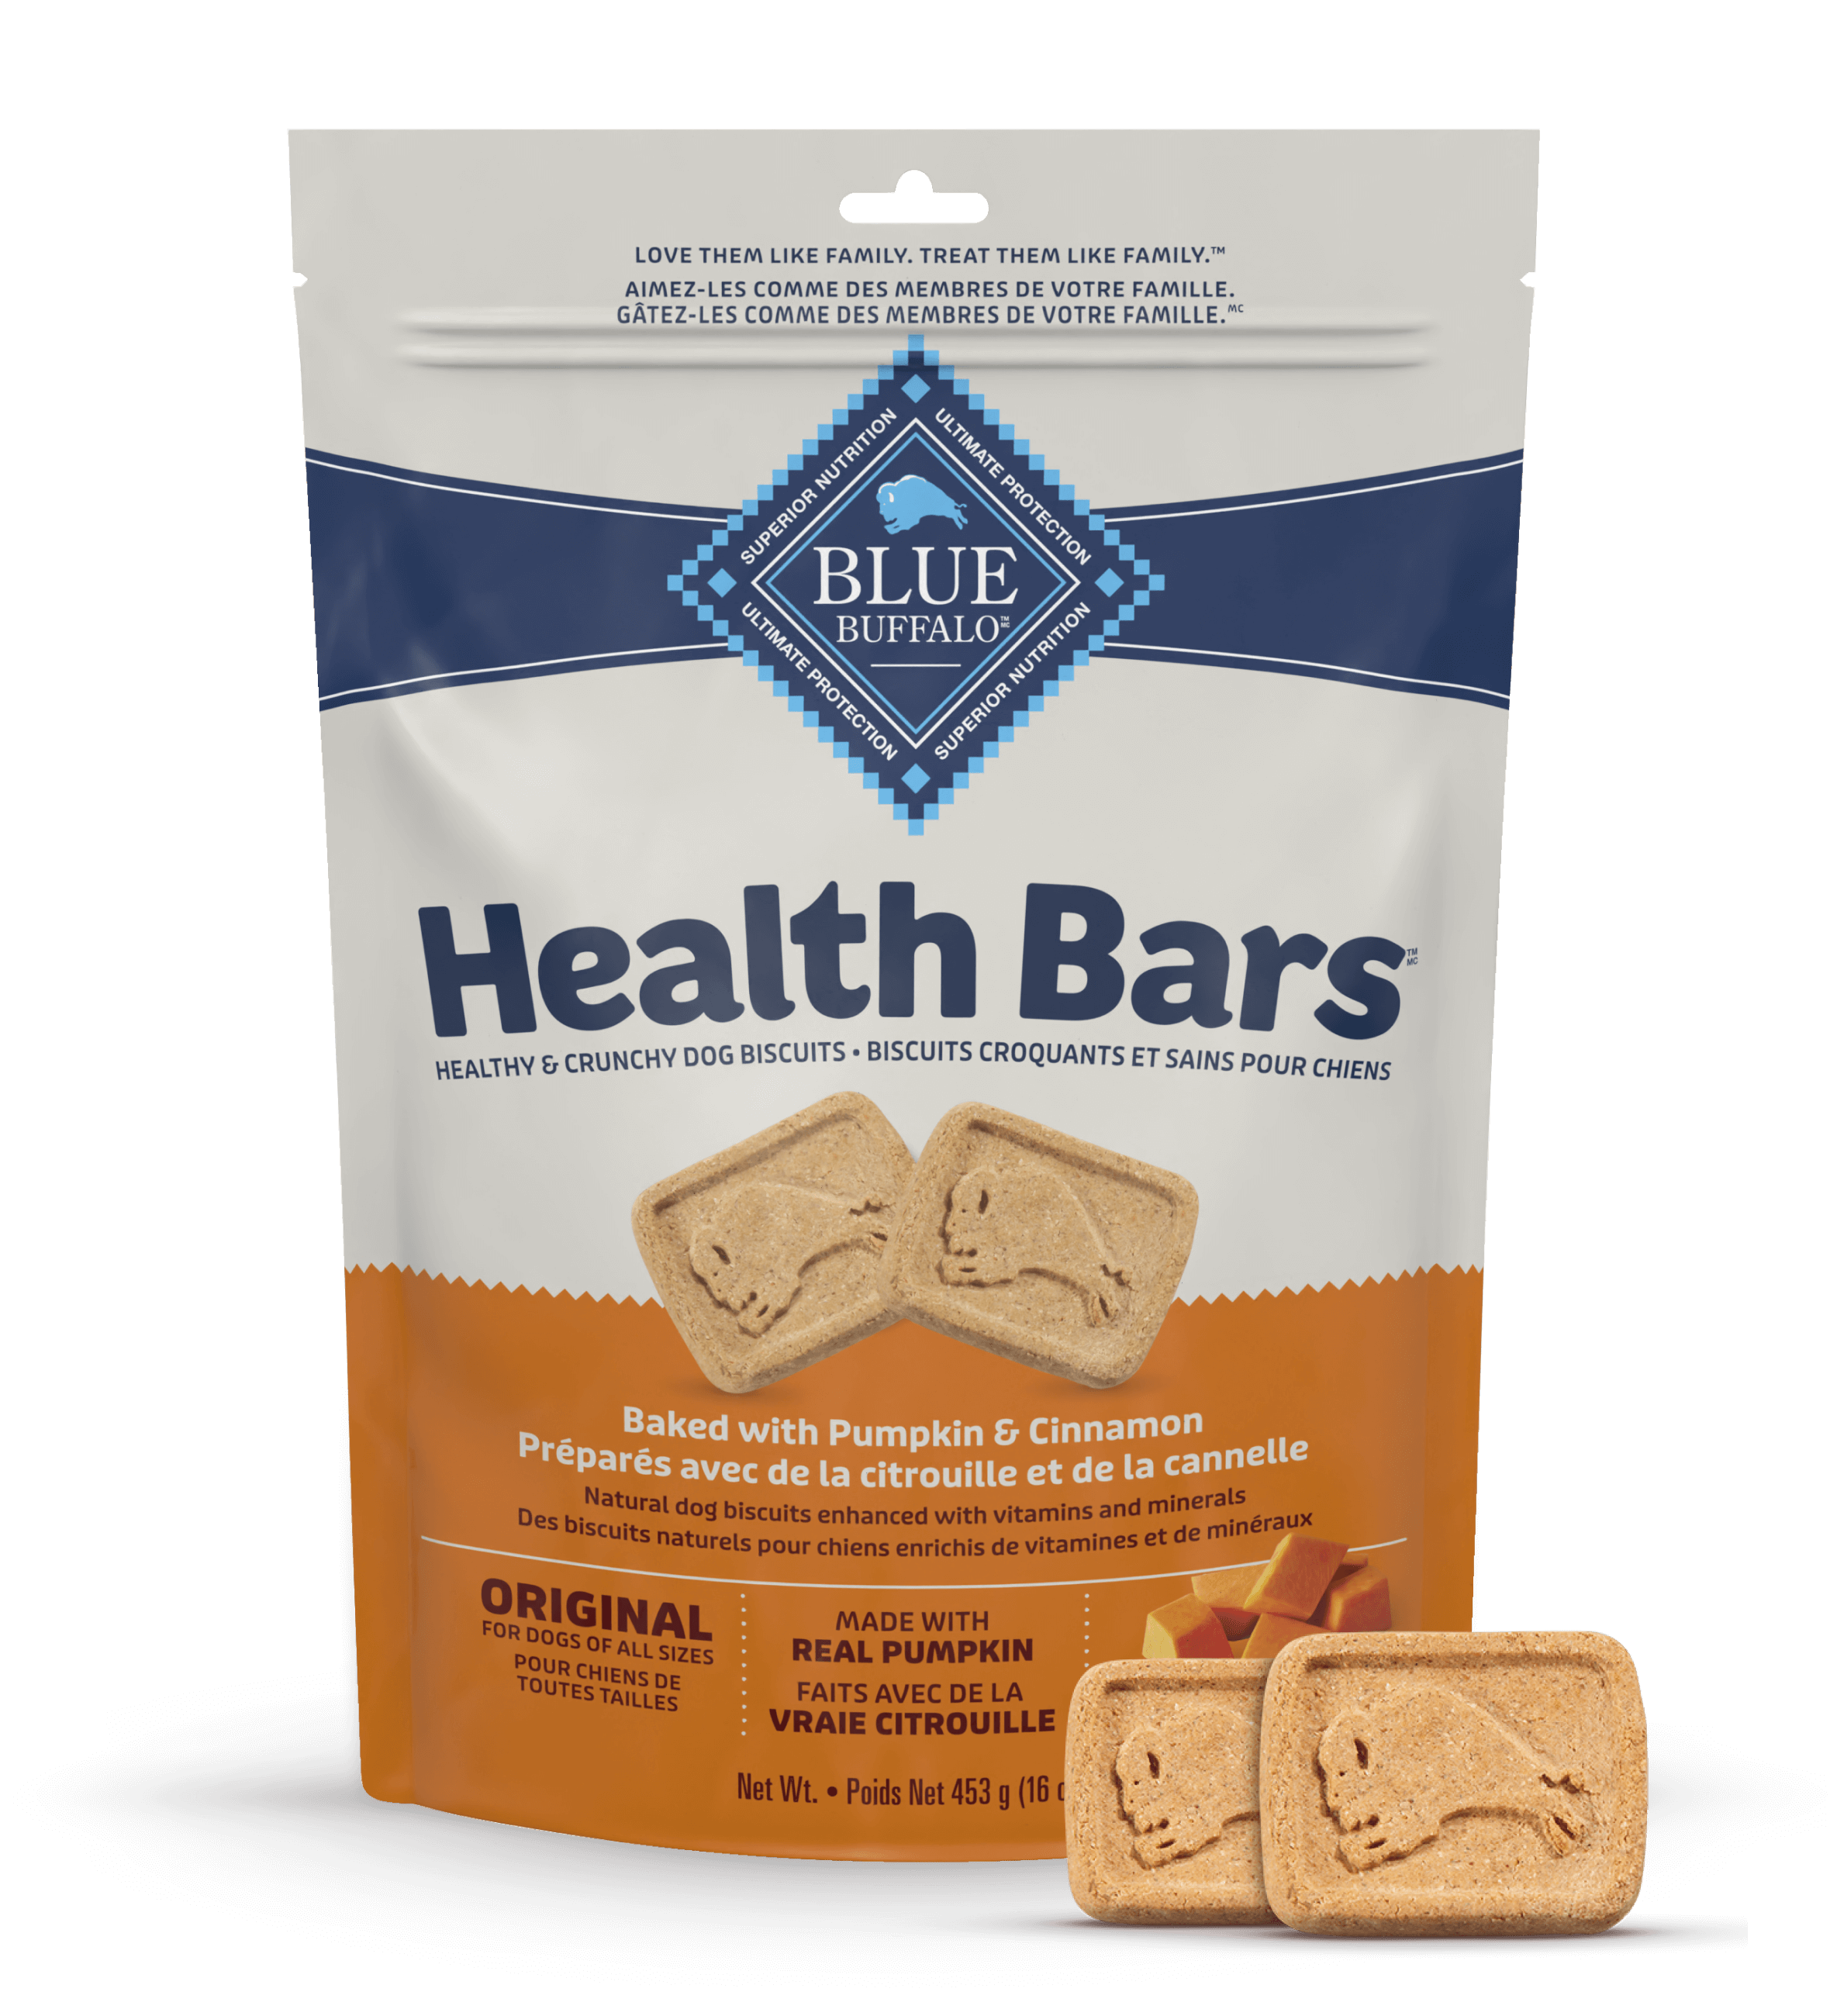 A package of Blue Buffalo Health Bars, baked dog biscuits with pumpkin and cinnamon, emphasizing natural ingredients and suitable for dogs of all sizes.